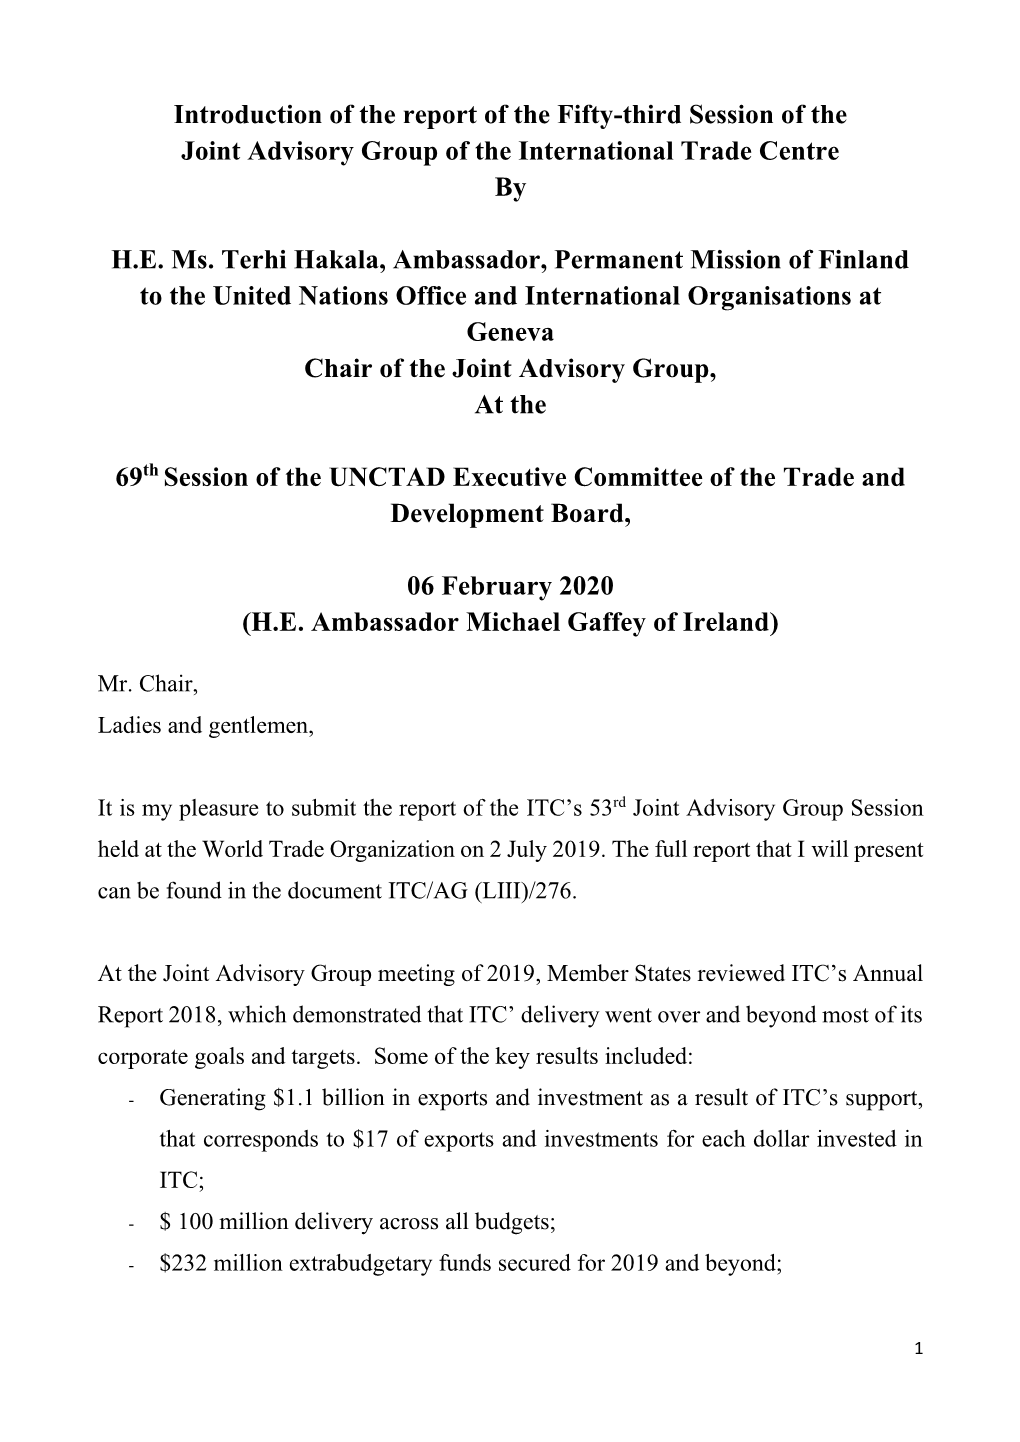 Report of the Fifty-Third Session of the Joint Advisory Group of the International Trade Centre By